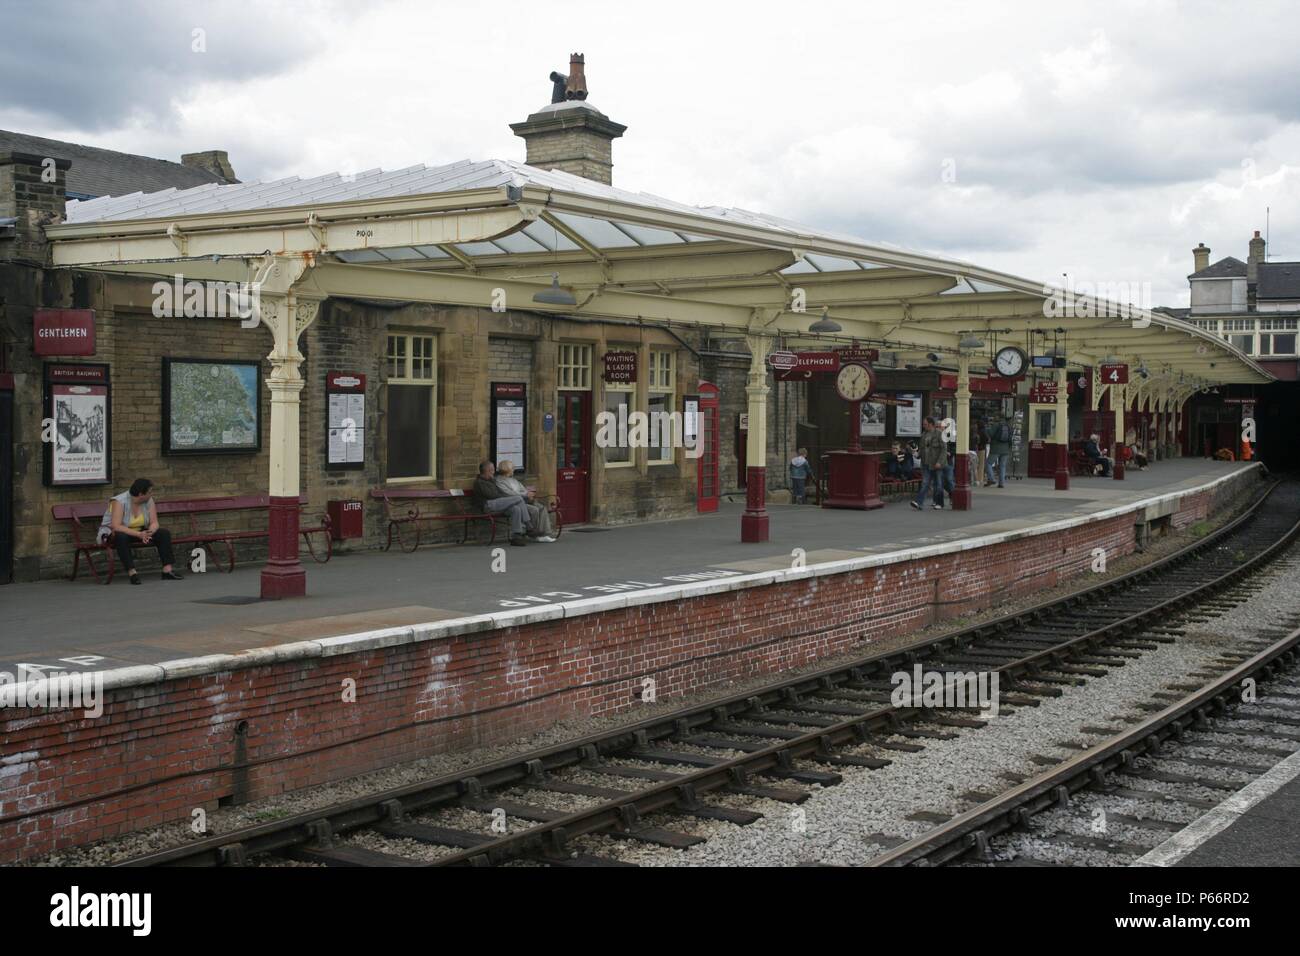 One of the Keighley and Worth Valley Railway platforms at Keighley station, Yorkshire, showing the newly refurbished glazed platform canopy. 2007 Stock Photo